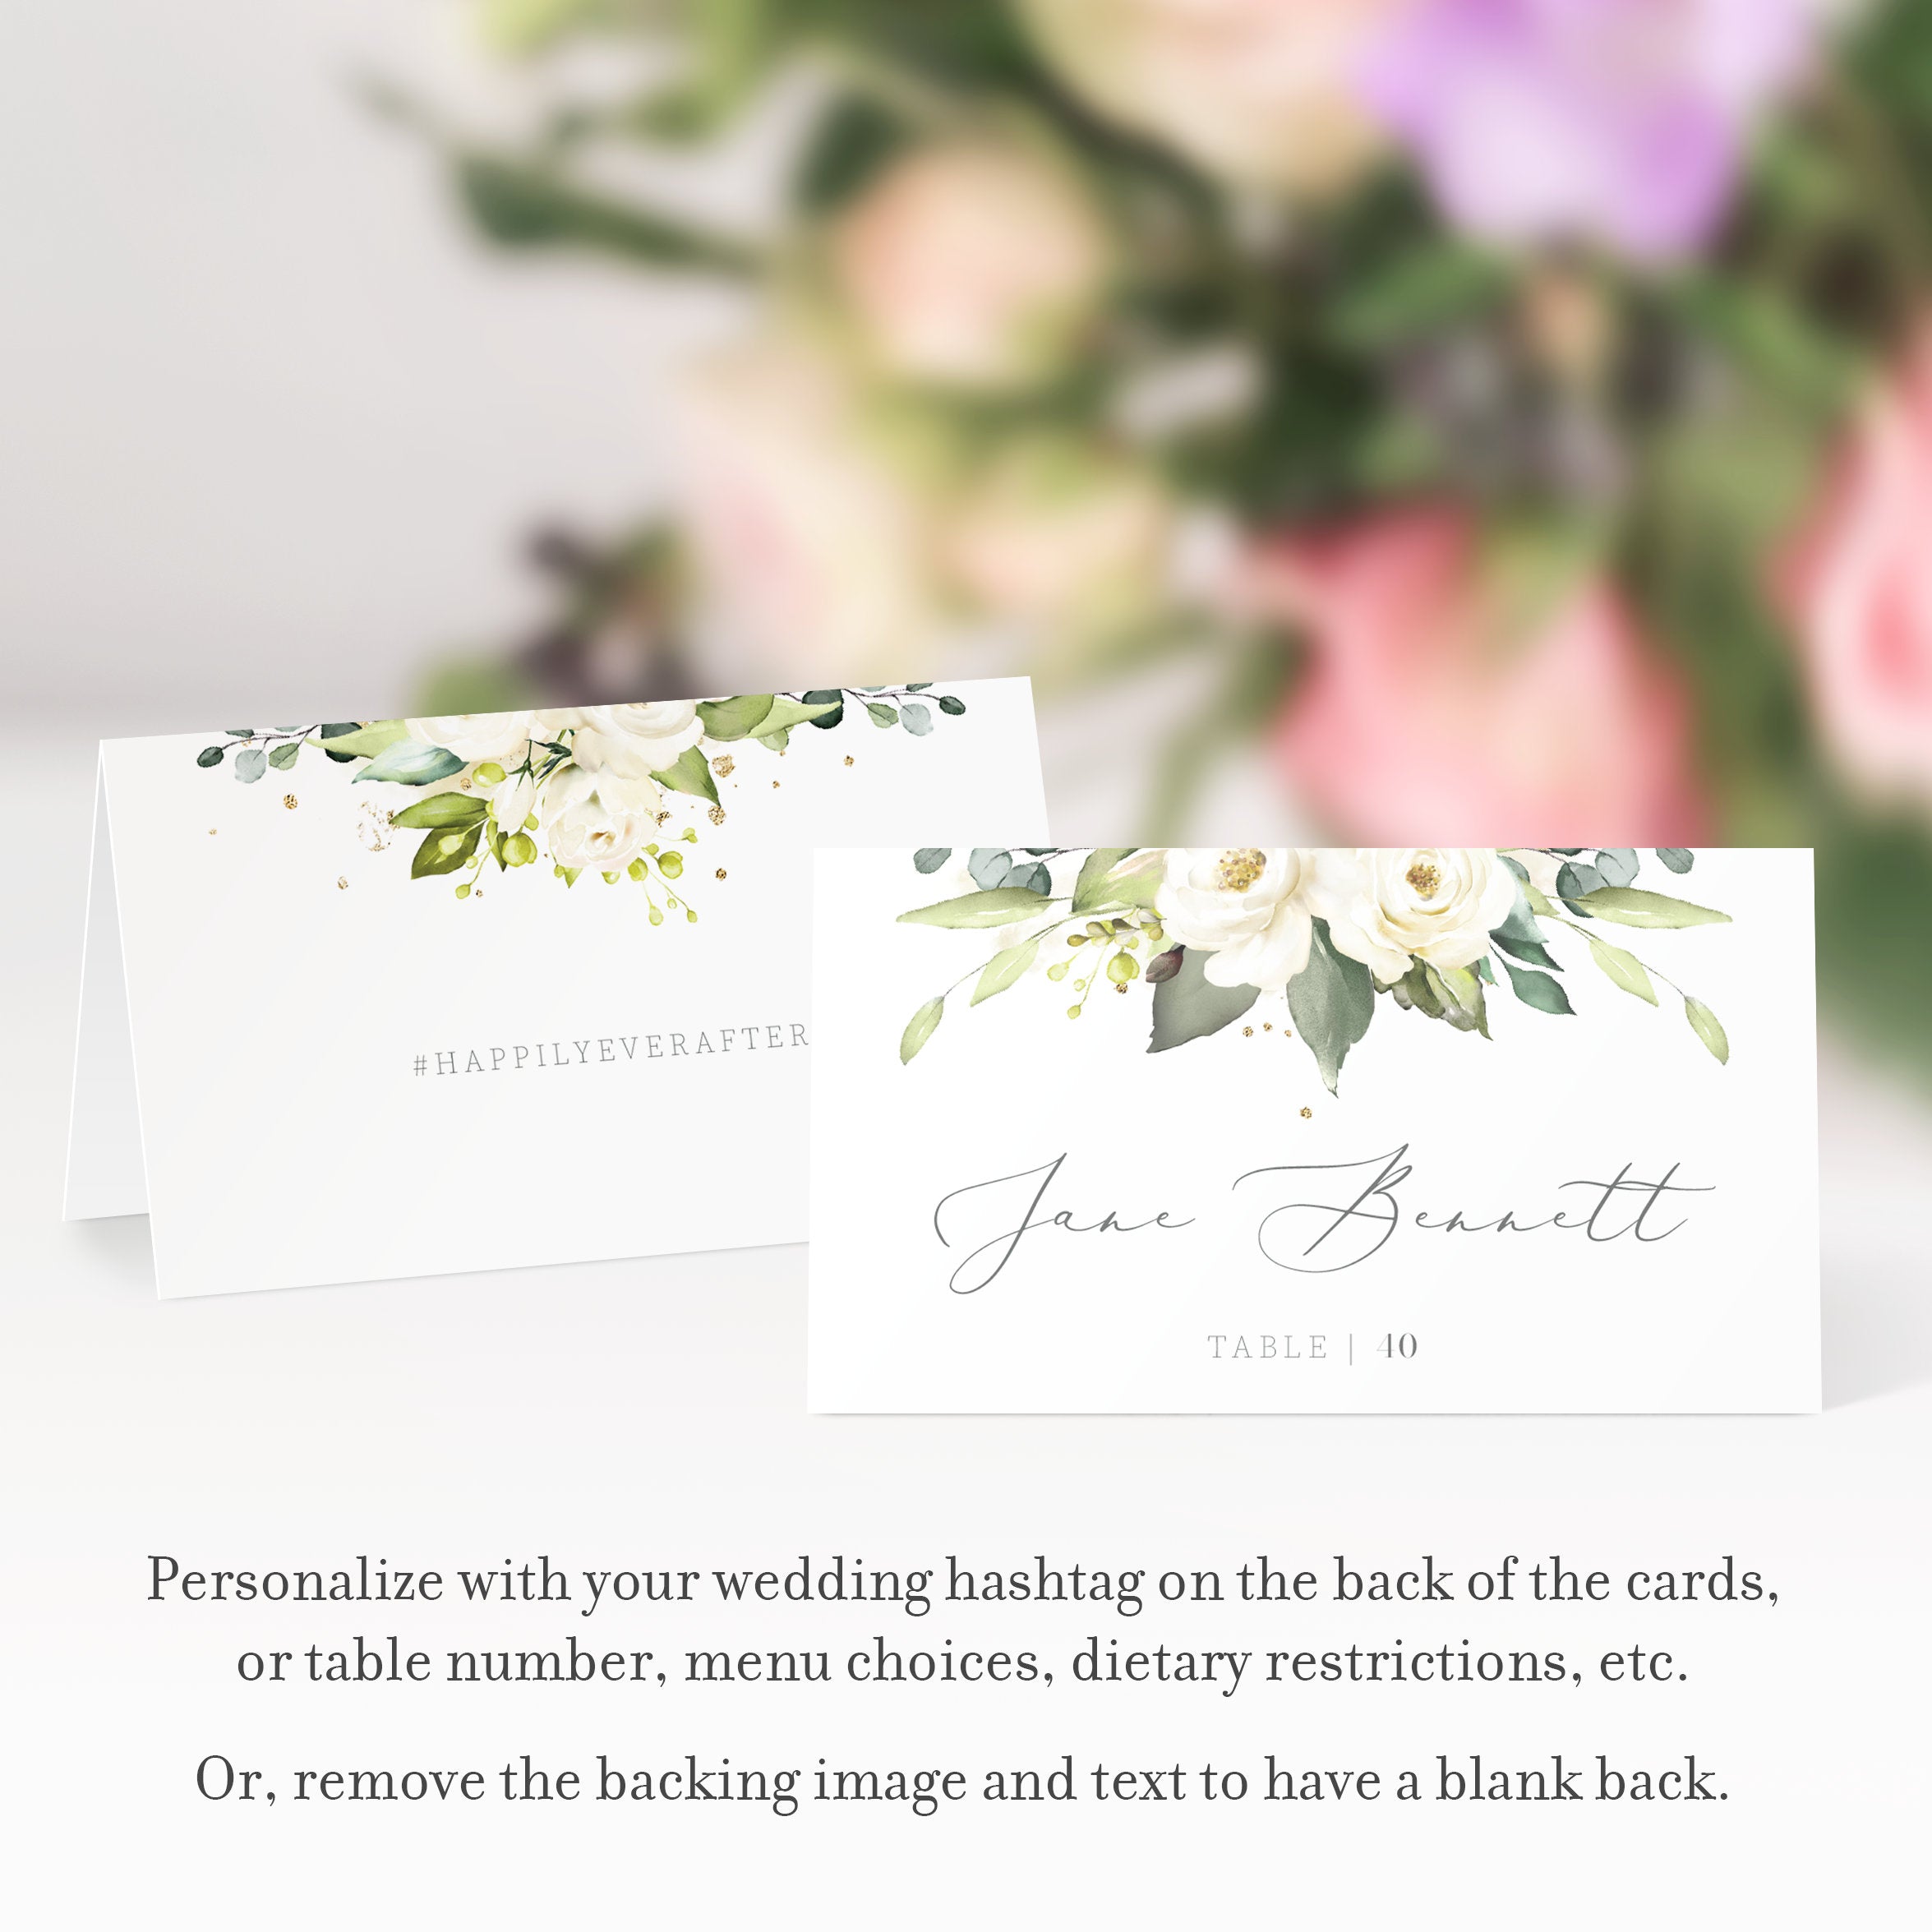 White Floral Greenery Wedding Place Card Template, Personalized Wedding Name Cards, Printable Place Cards, DIGITAL DOWNLOAD - WRG100 - @PlumPolkaDot 